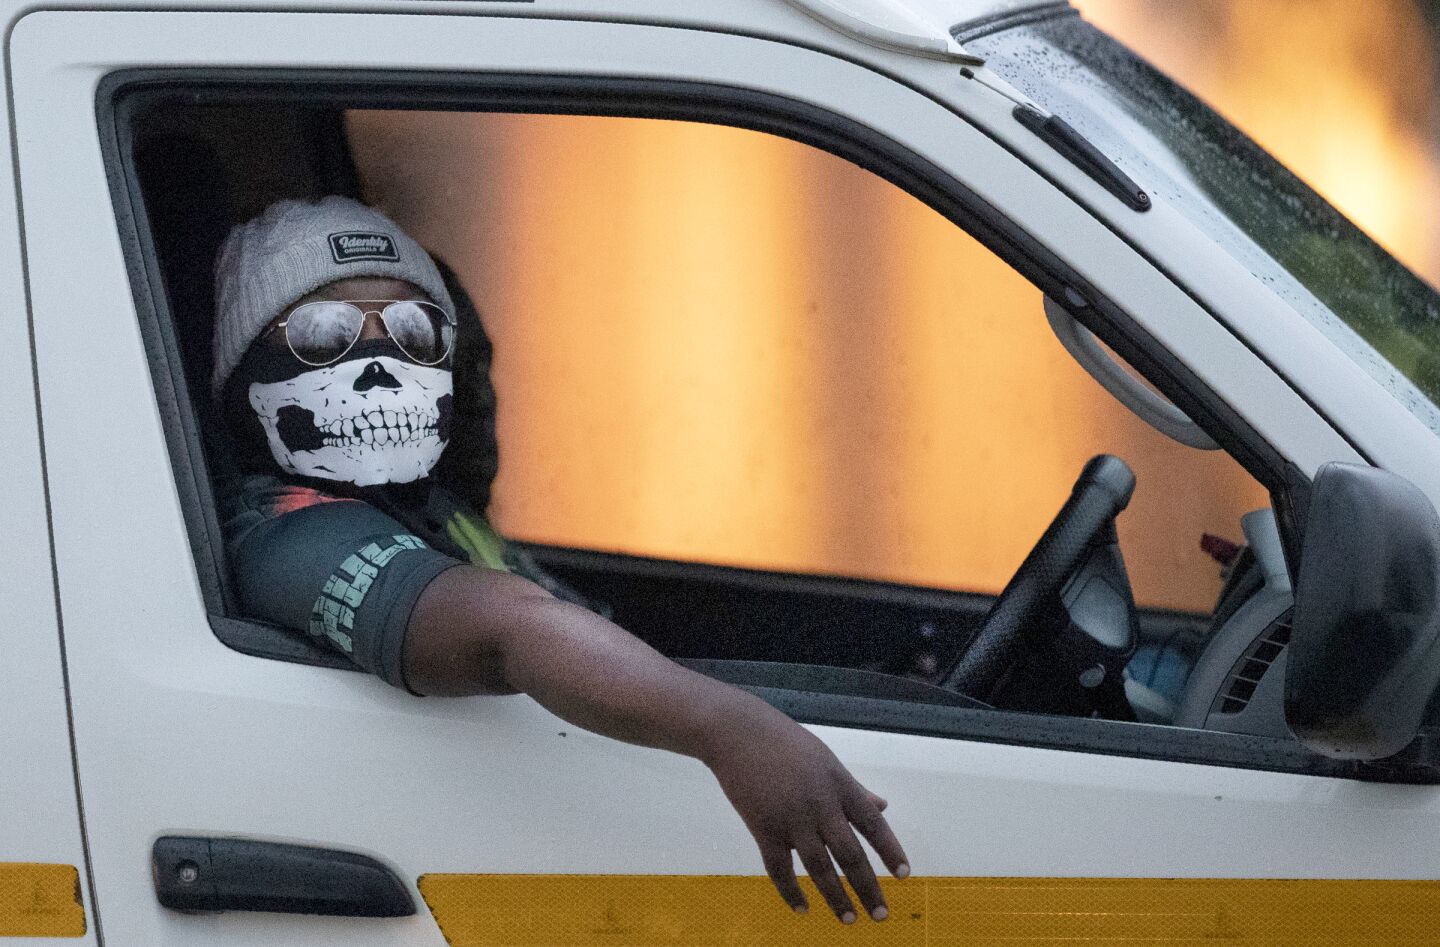 South Africa: A minibus taxi driver wearing a face mask looks on during his journey in Johannesburg, South Africa.